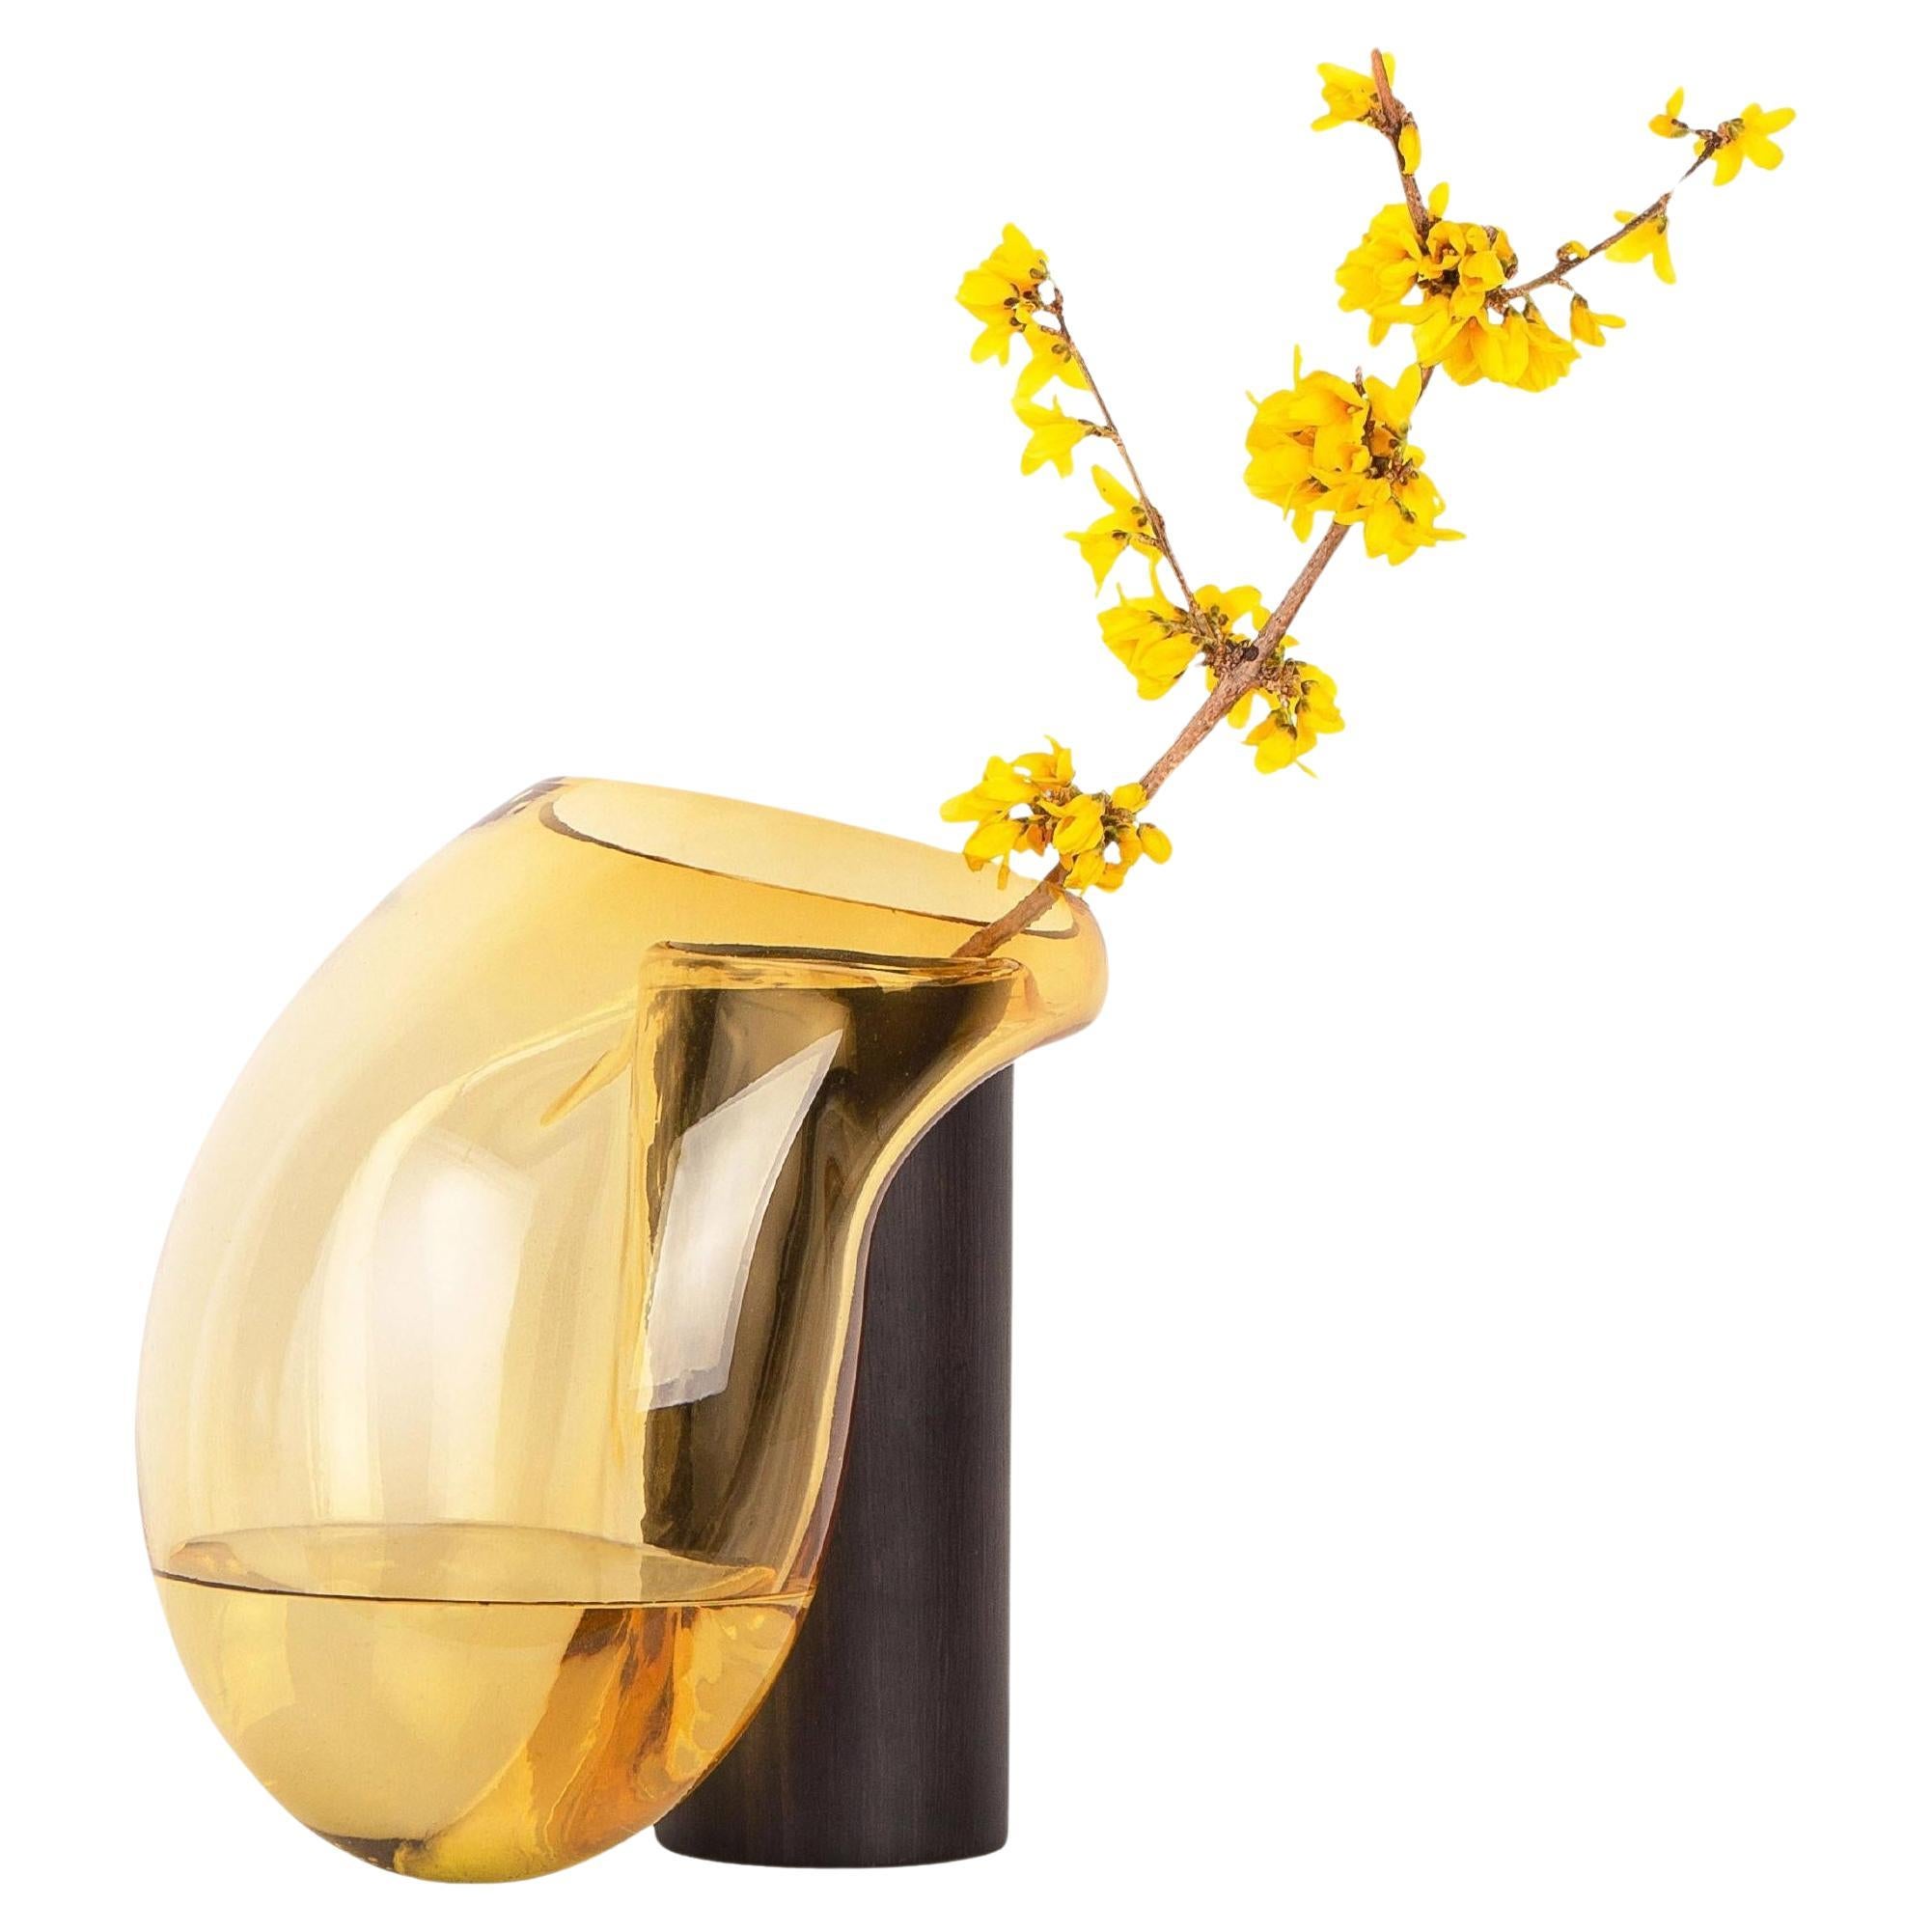 Contemporary Vase 'Gutta Boon CS2' by Noom, Large, Blown Amber Glass and Oak